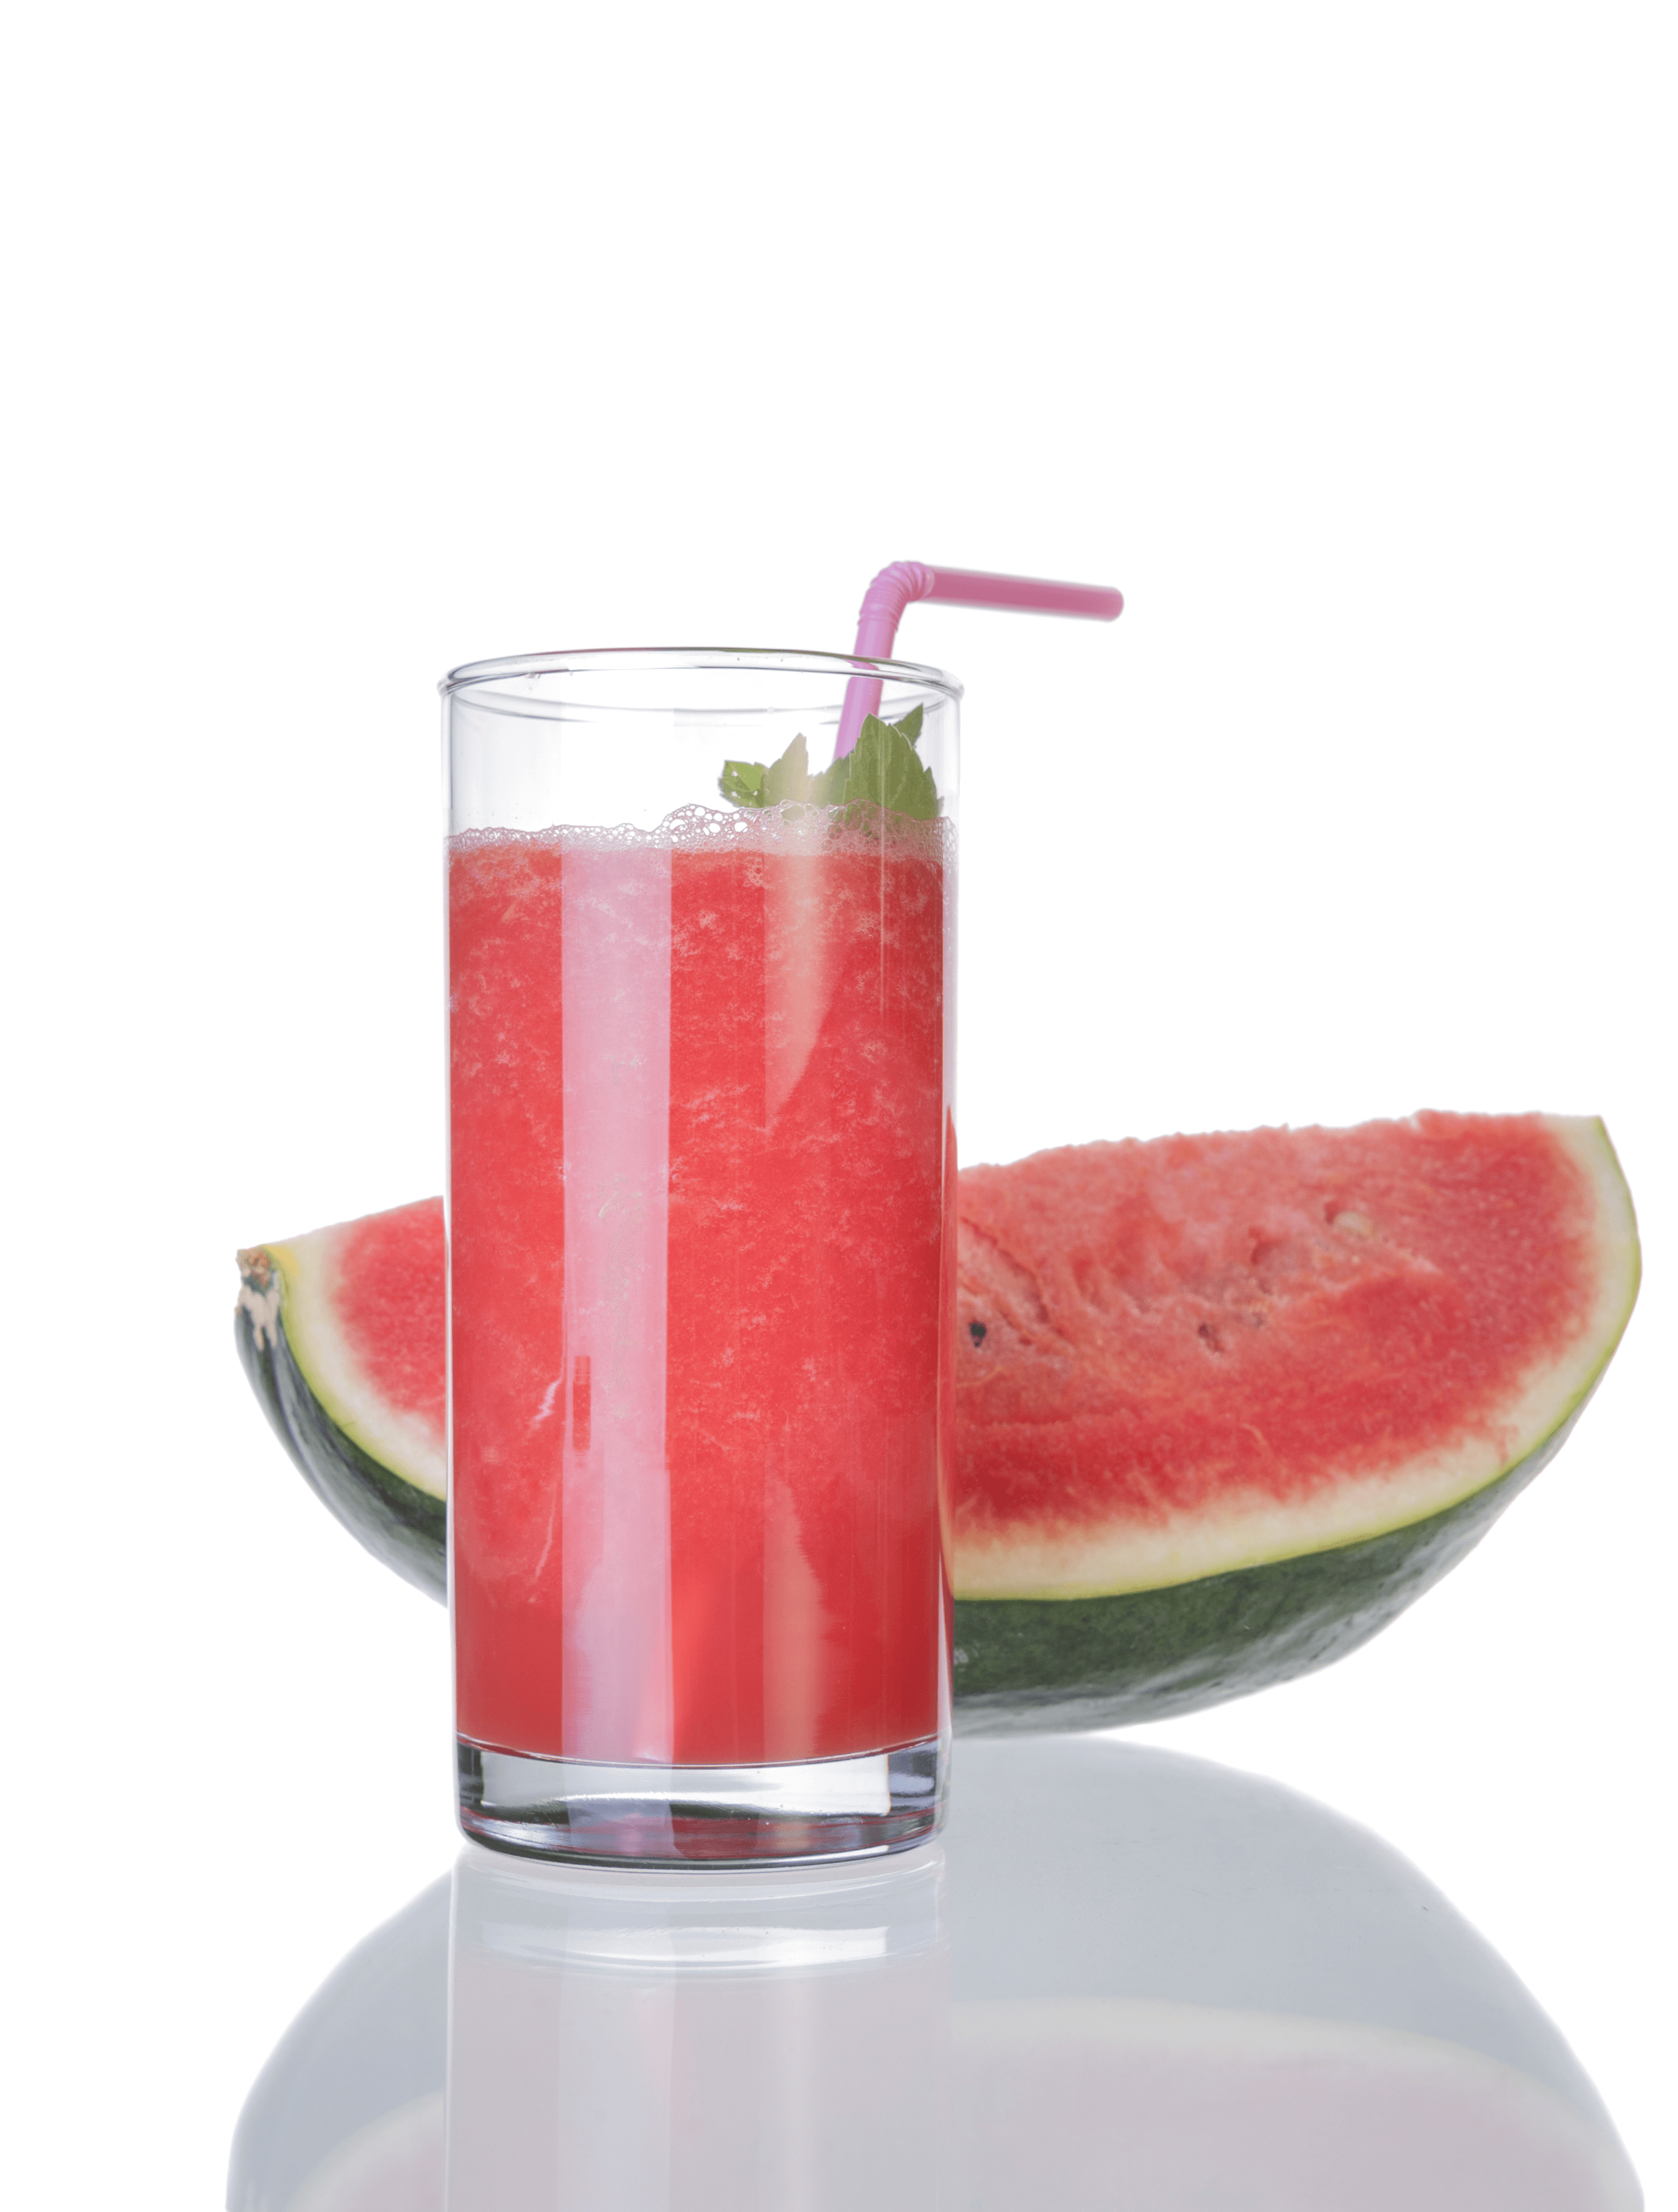 Are you Familiar With Any Of these 7 Amazing Watermelon Juice facts?